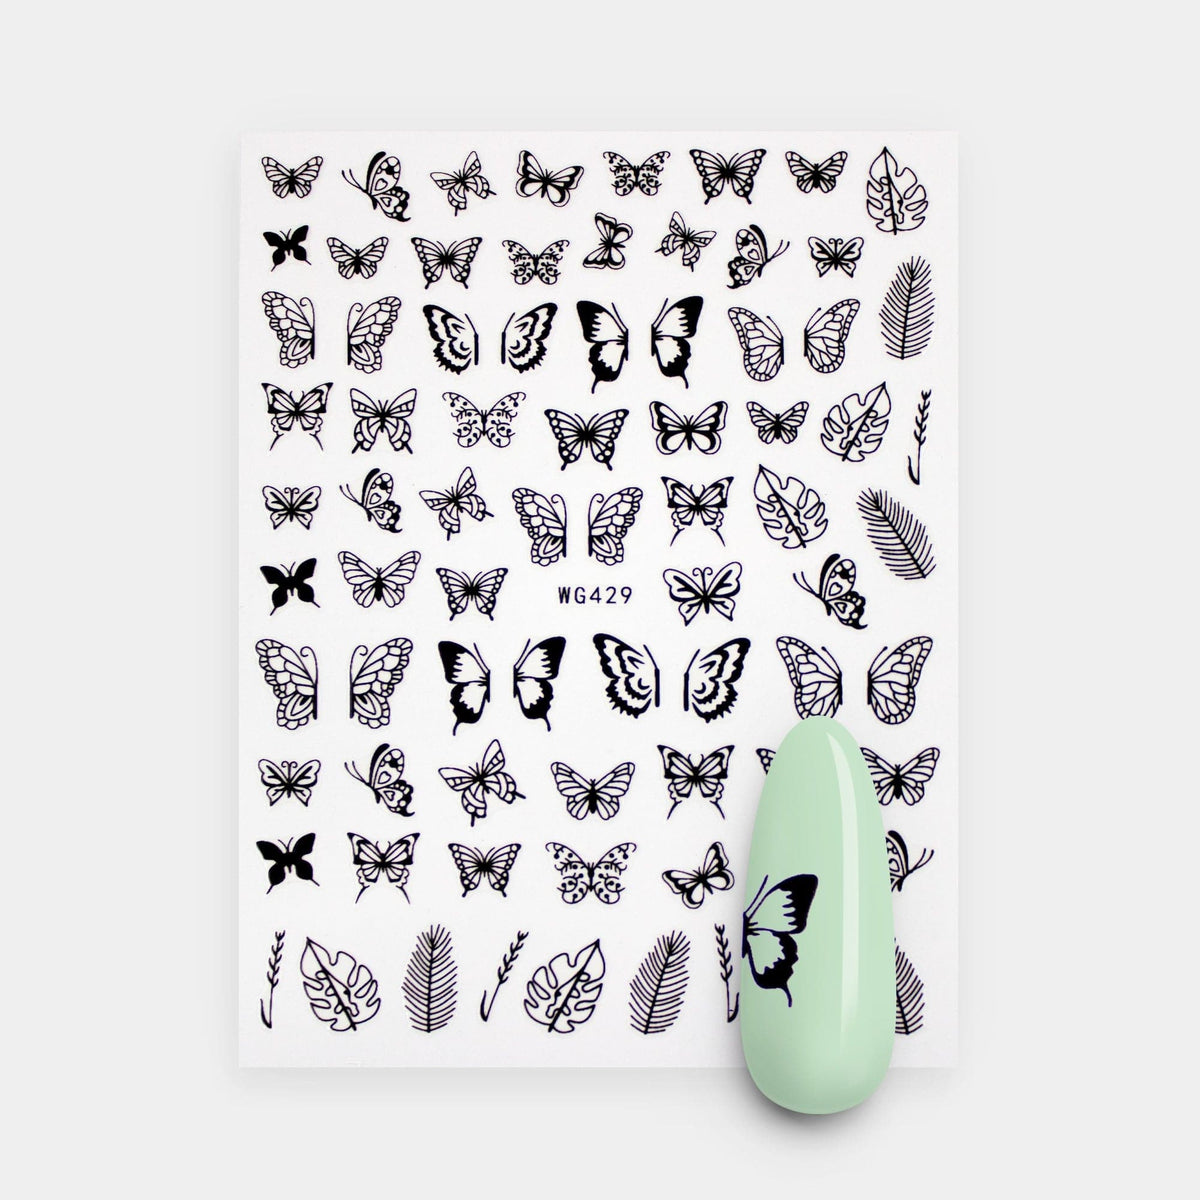 Gelous Black Butterflies Nail Art Stickers product photo - photographed in New Zealand